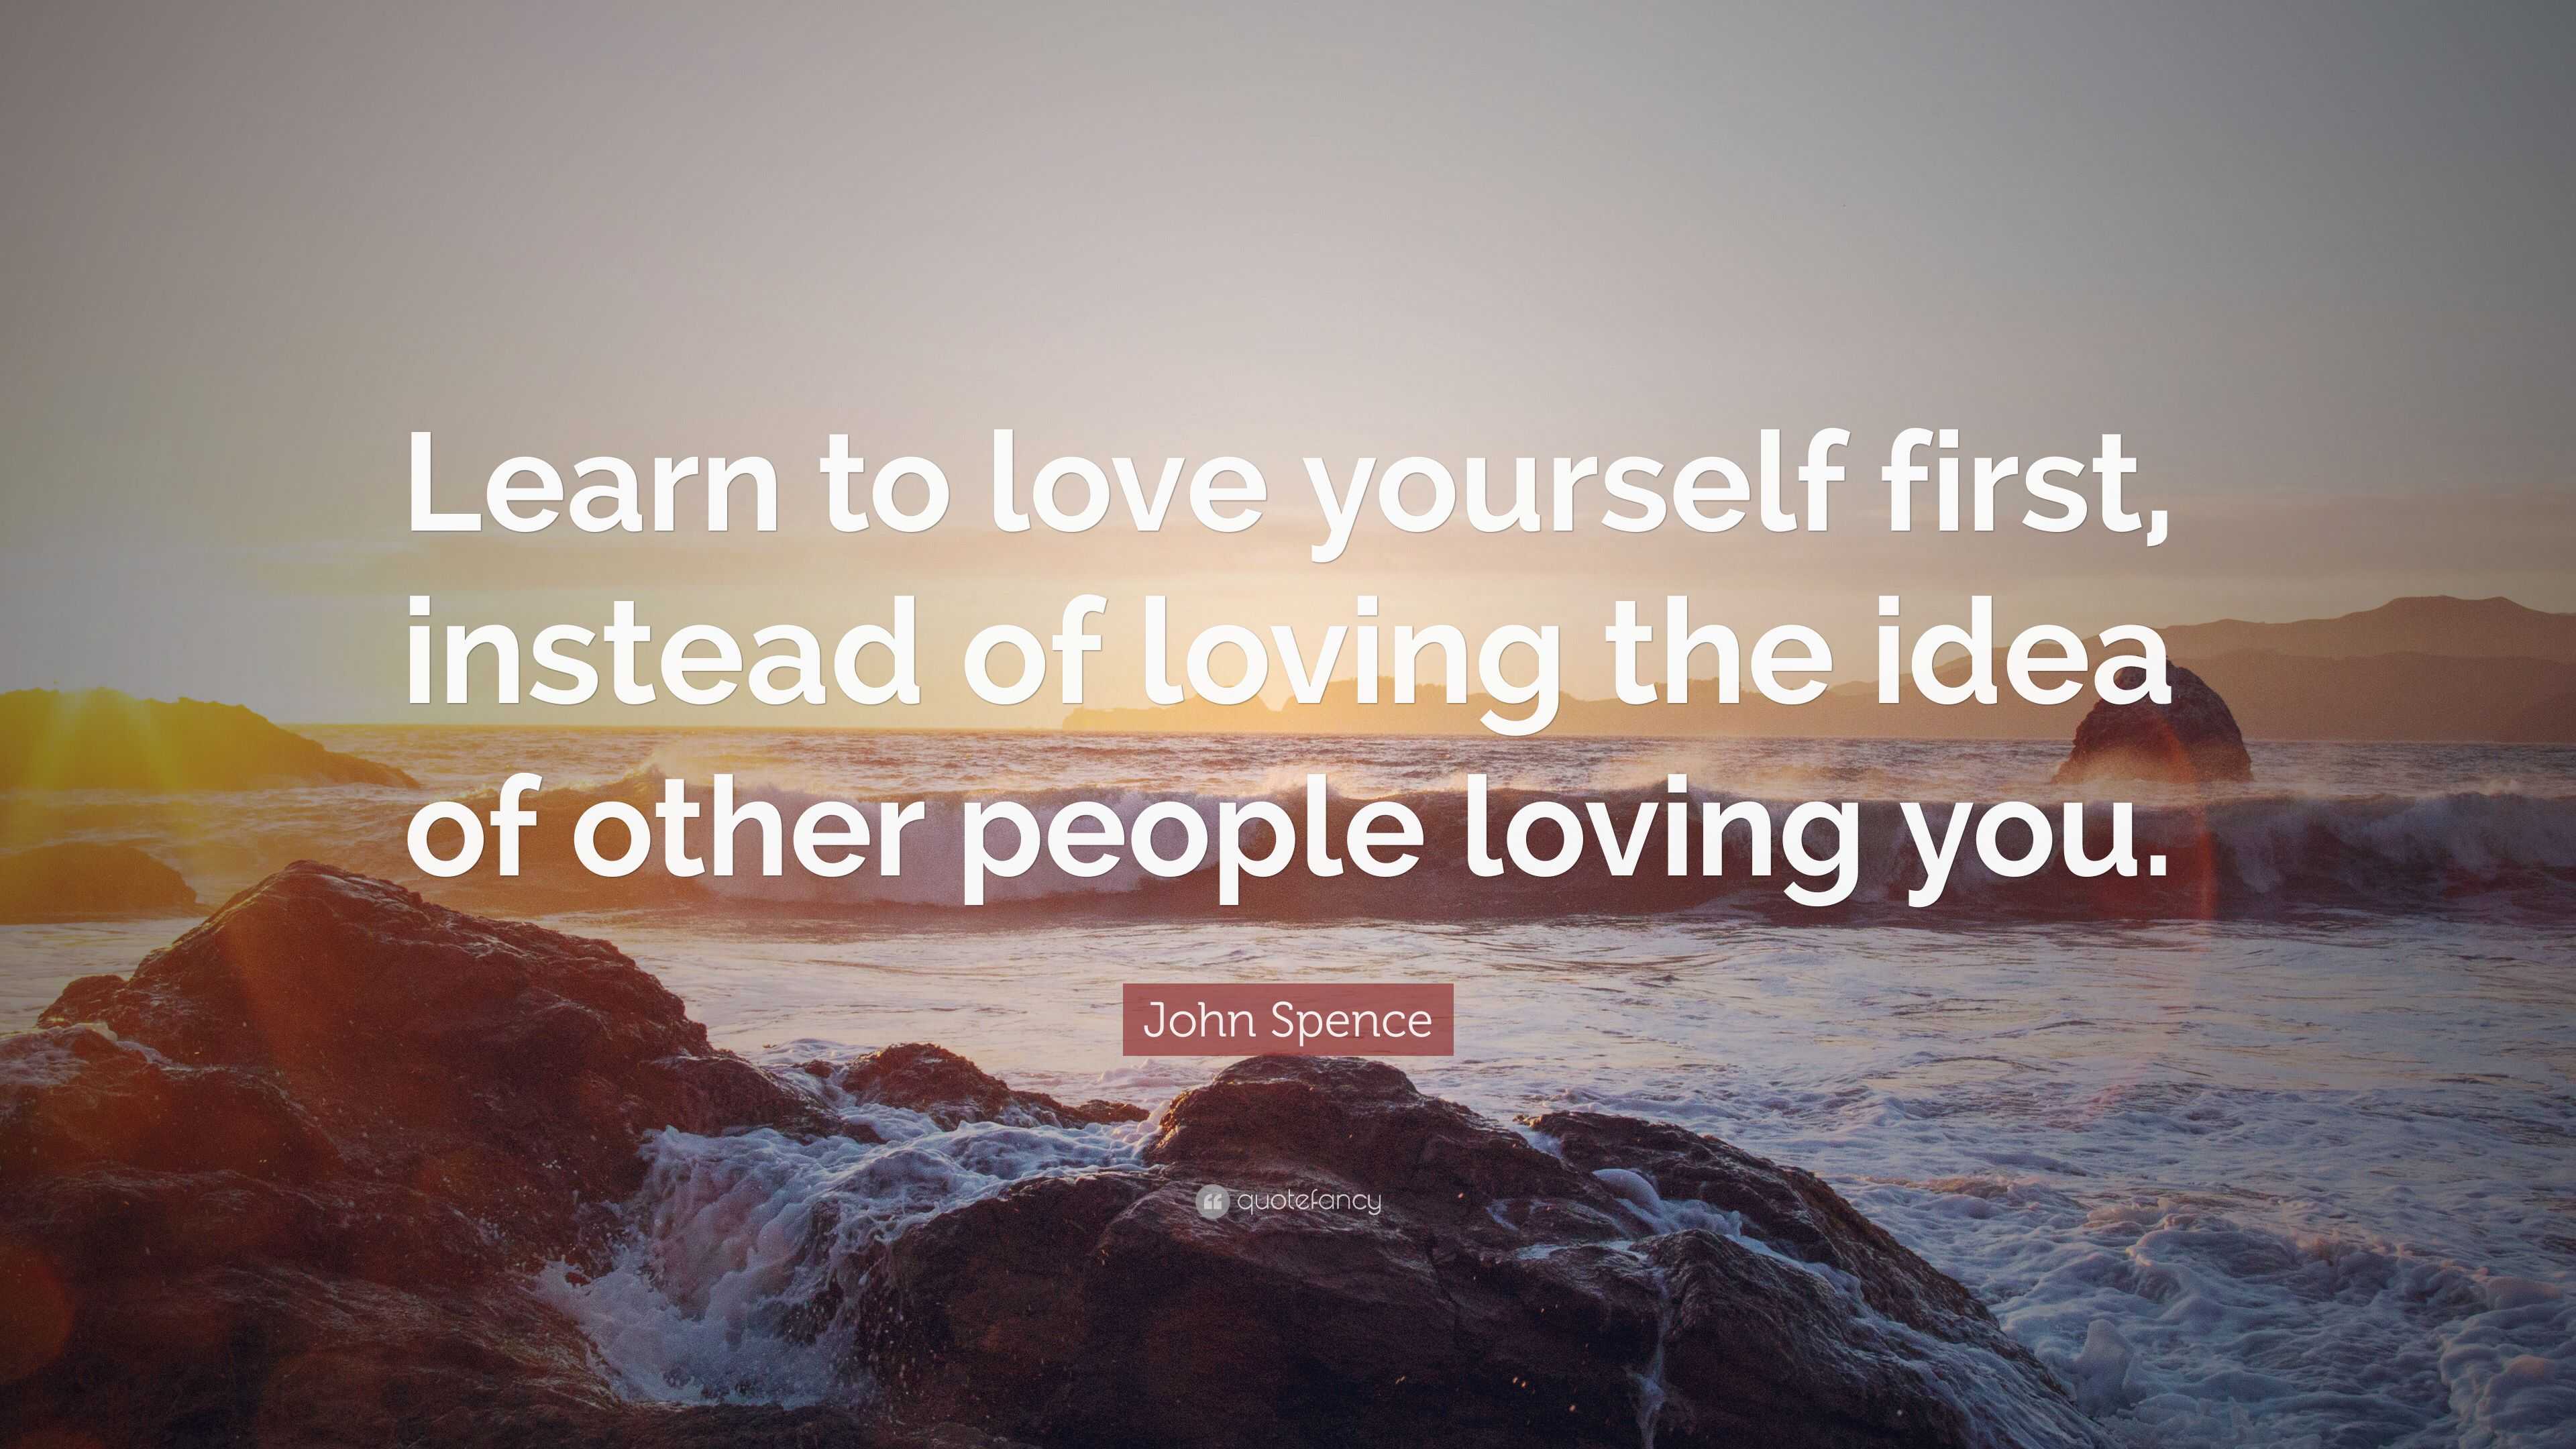 John Spence Quote “Learn to love yourself first, instead